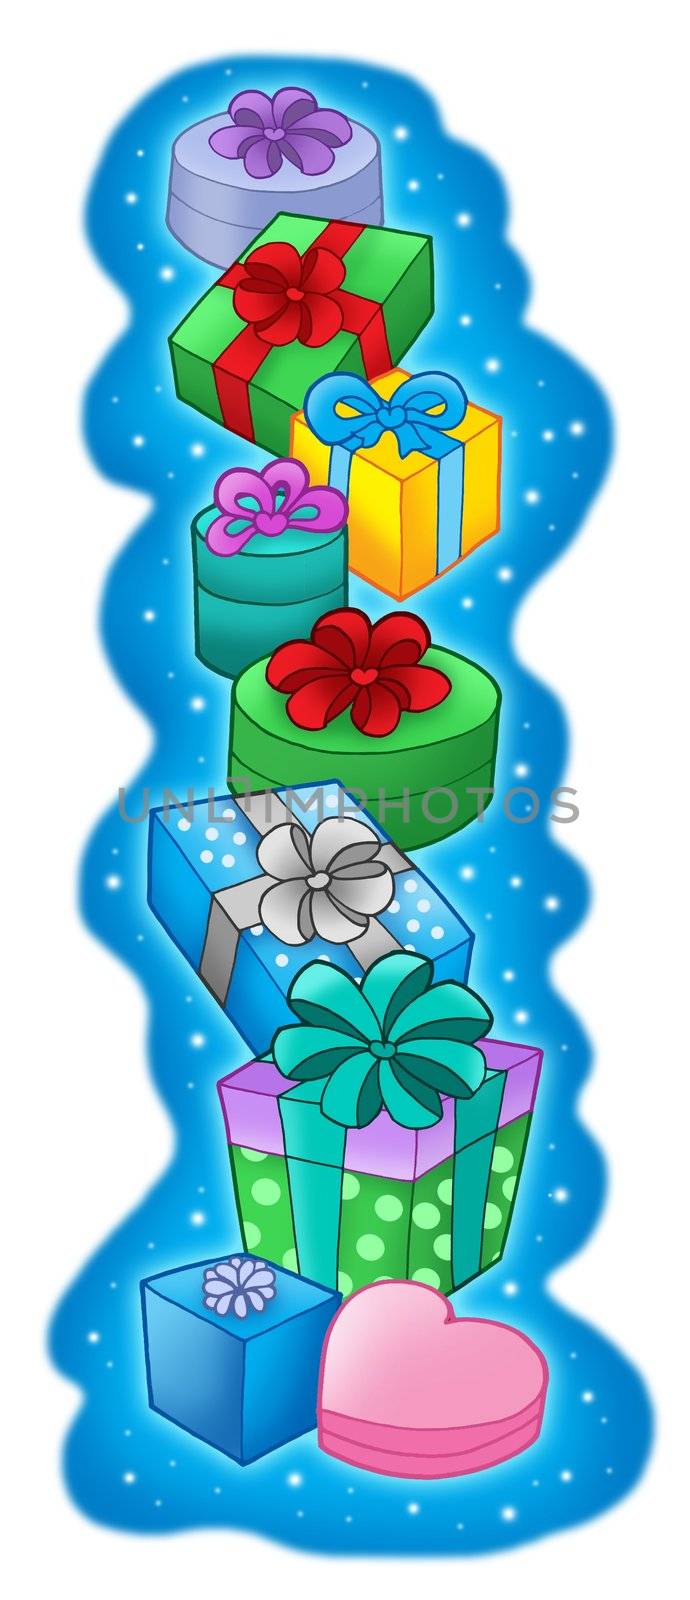 Pile of Christmas gifts on blue background -color illustration.